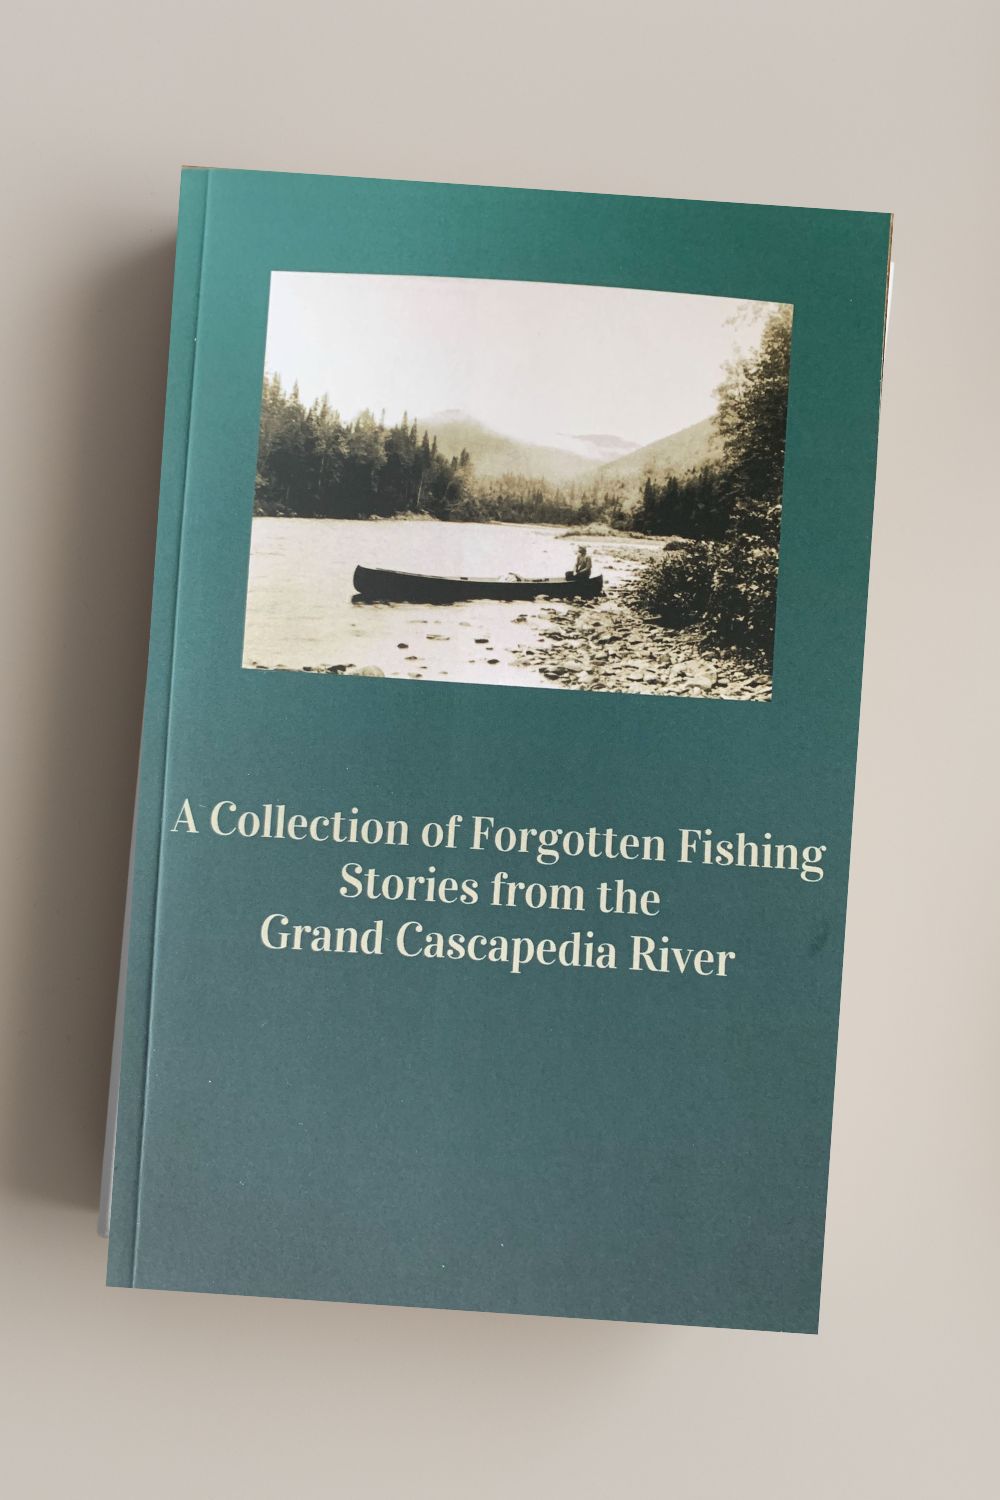 A Collection of Forgotten Fishing Stories from the Grand Cascapedia River